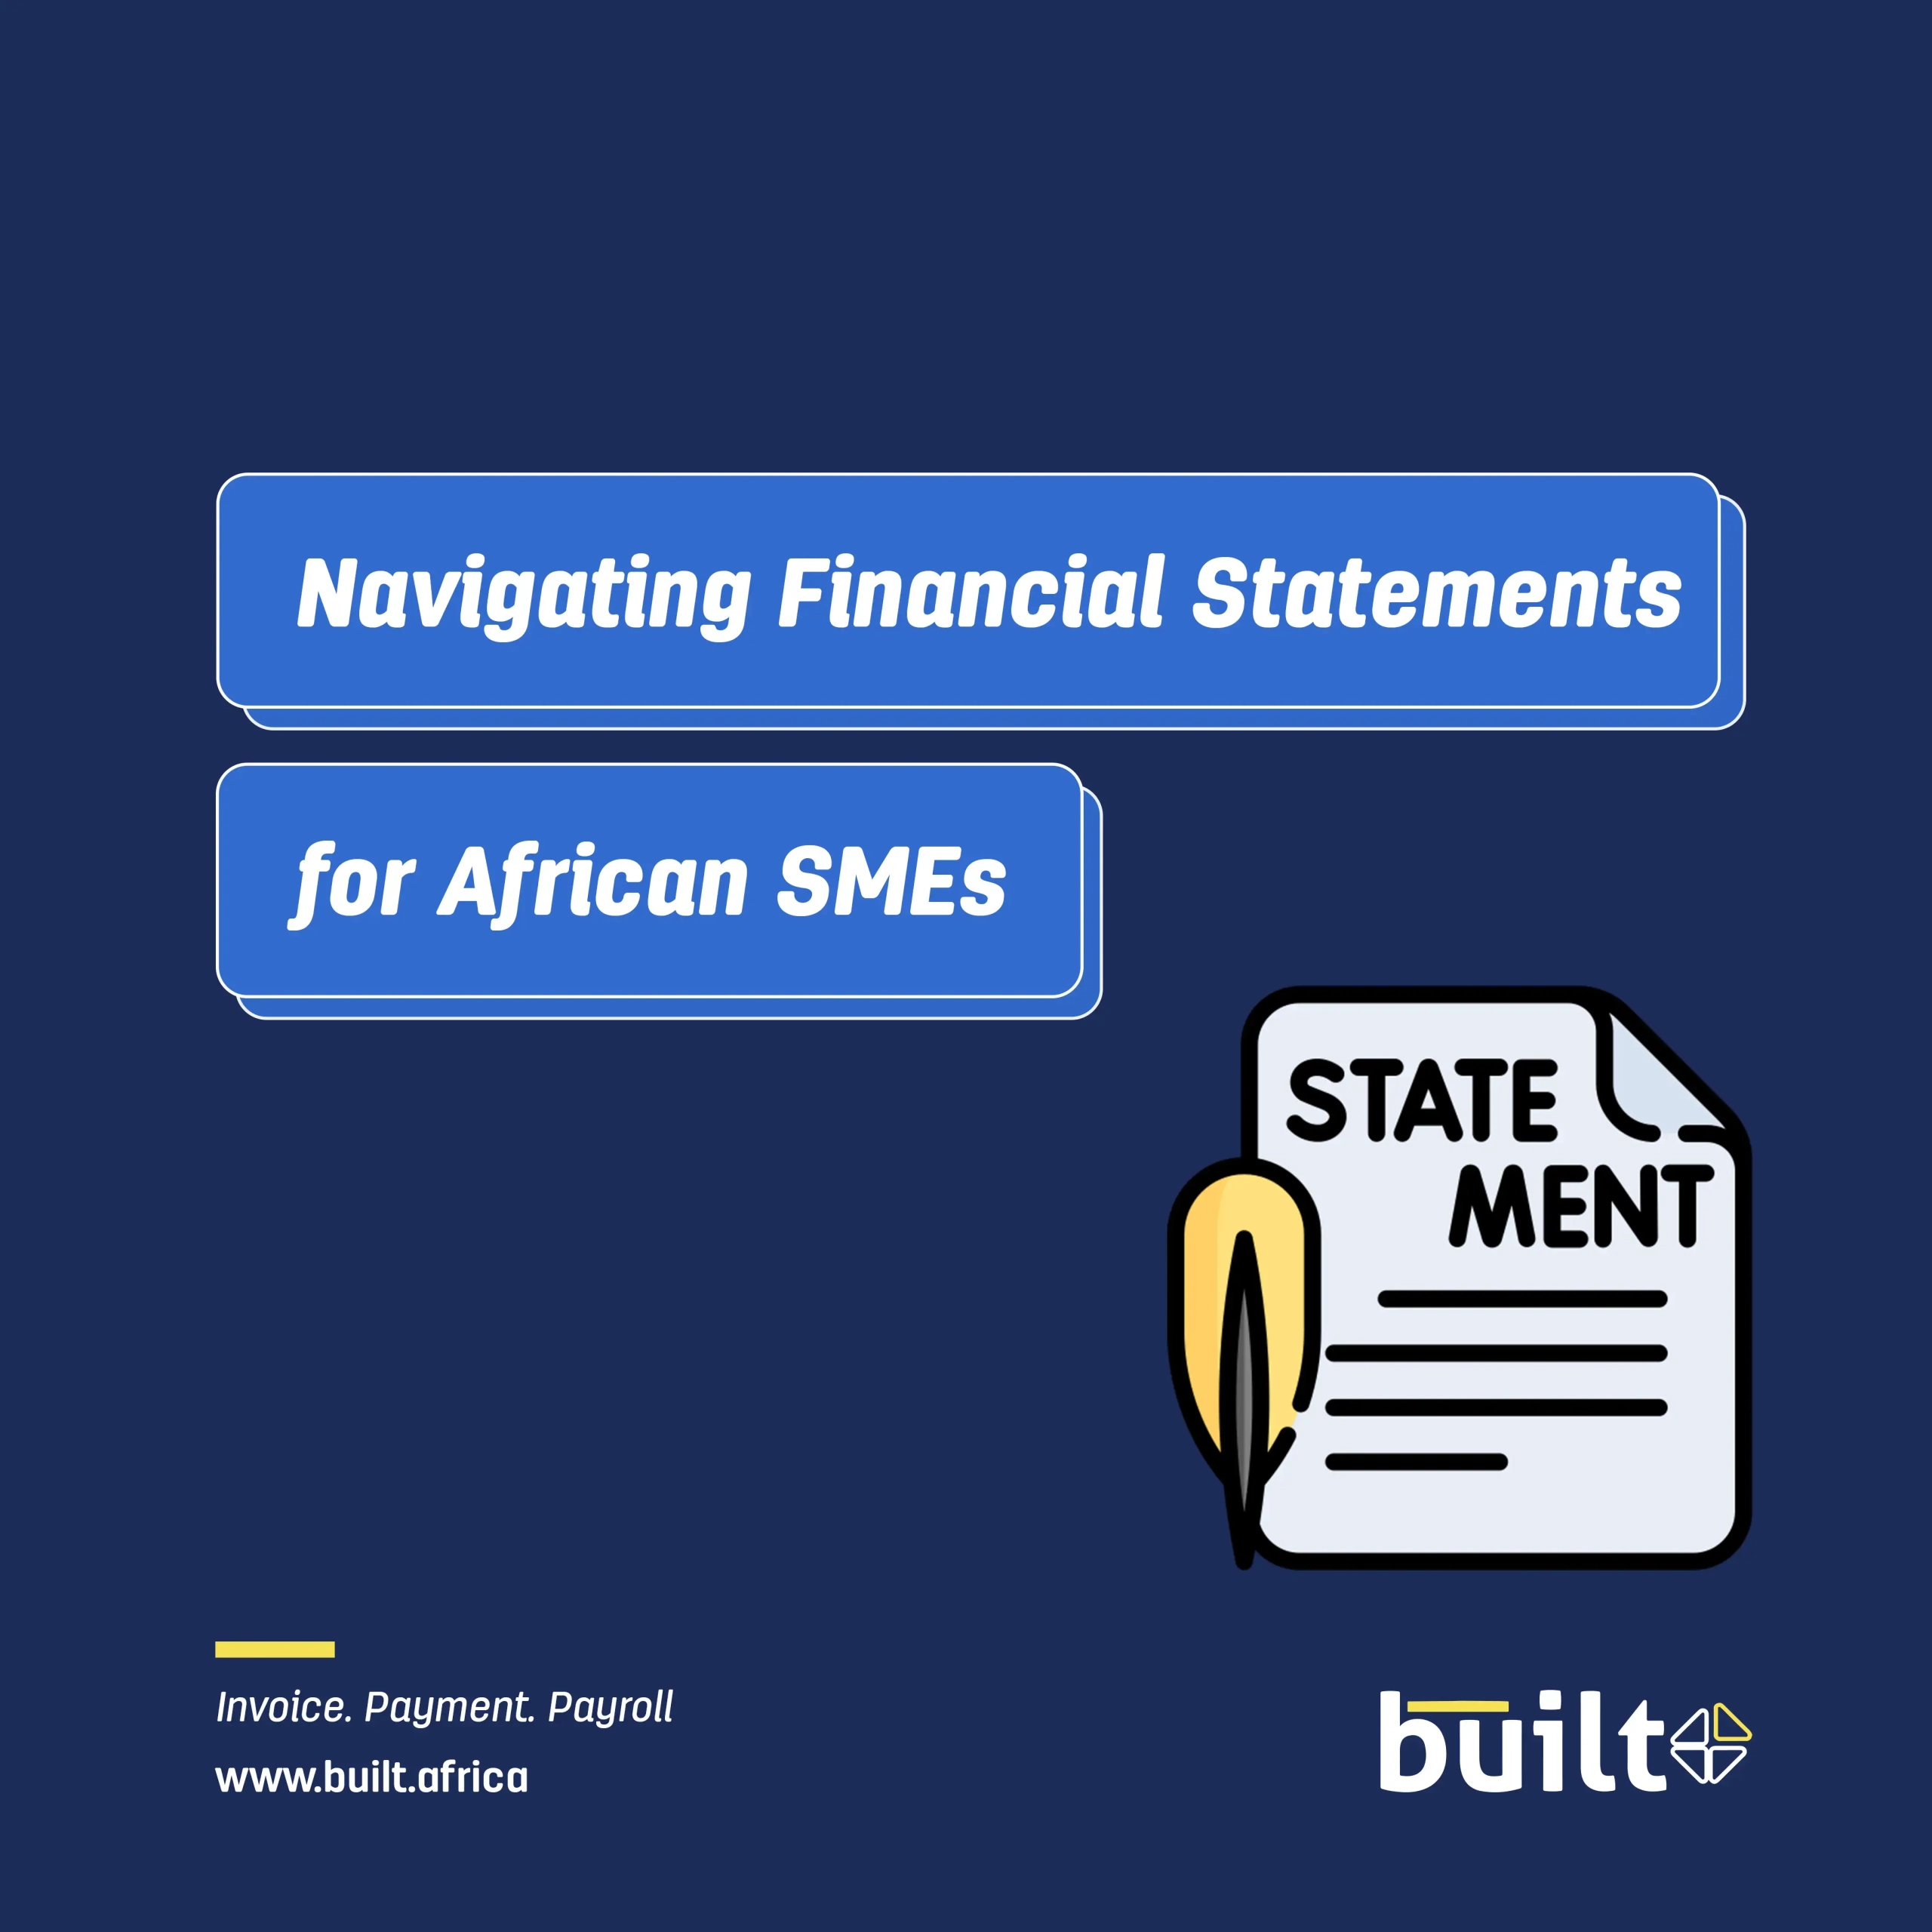 Navigating Financial Statements for African SMEs